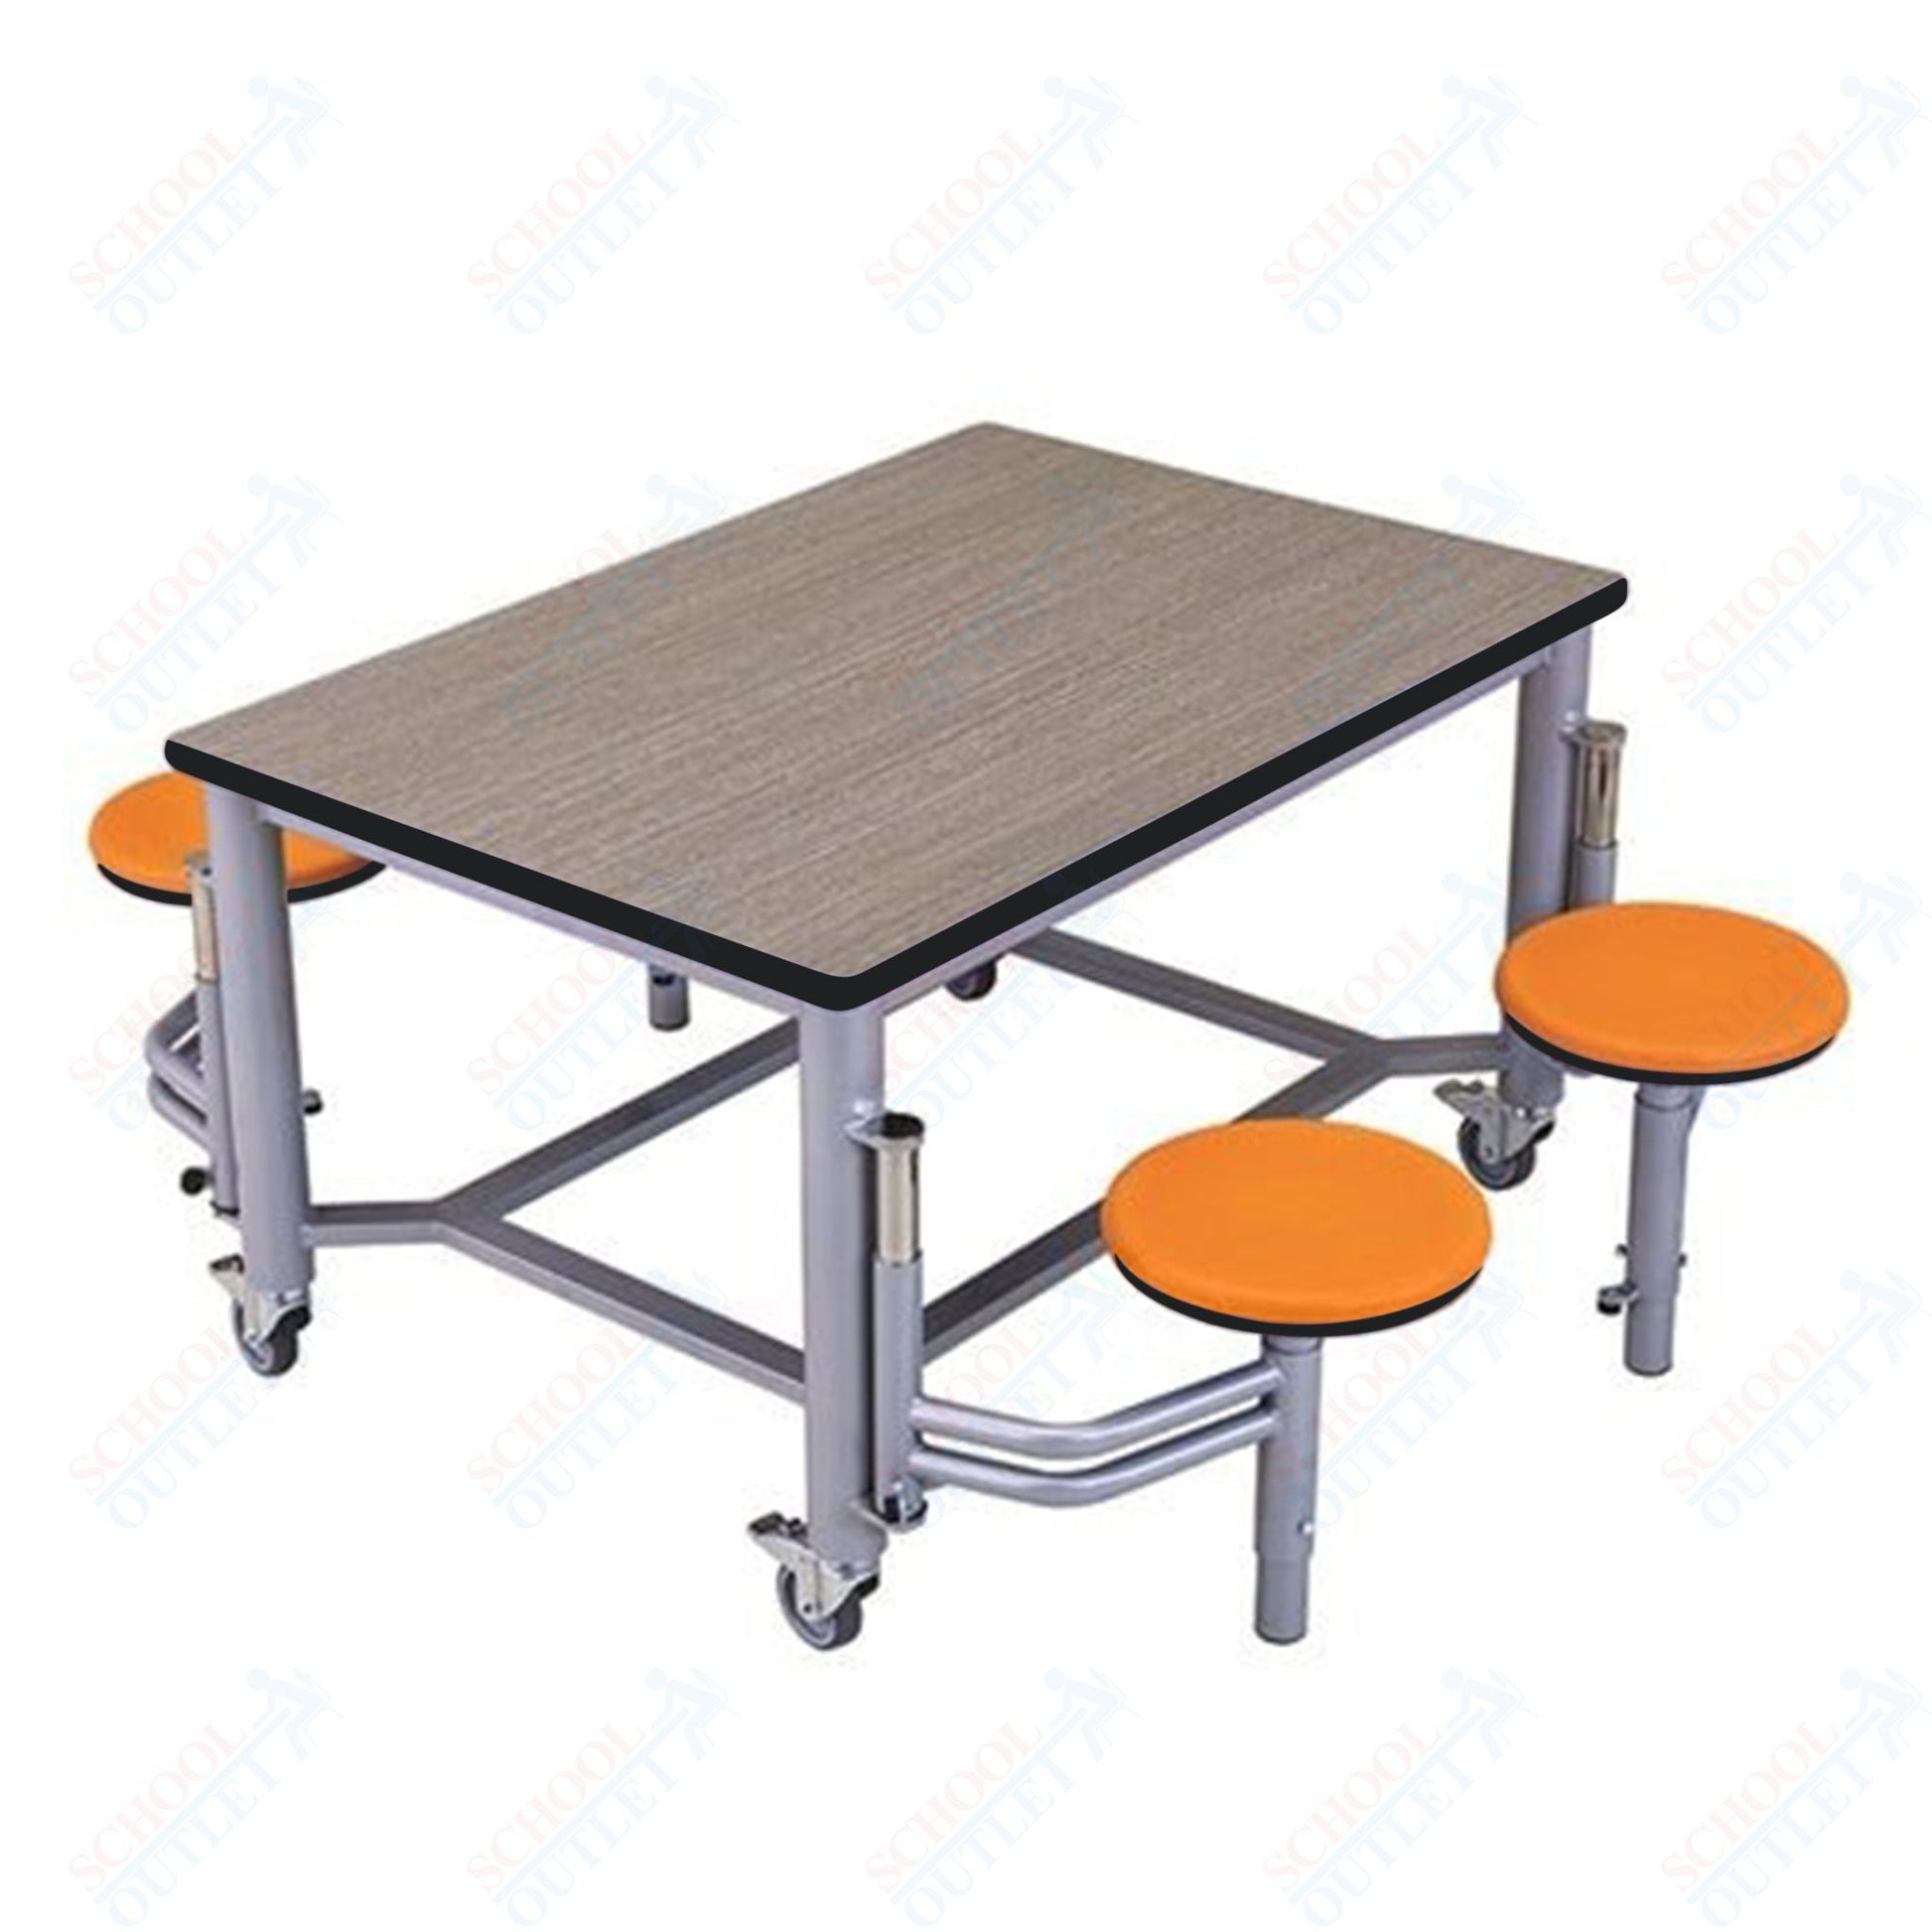 AmTab Mobile Stool Table - Group Collaboration High Table - 36"W x 52"L x 29"H - 4 Stools (AMT - MGST3652 - 29) - SchoolOutlet